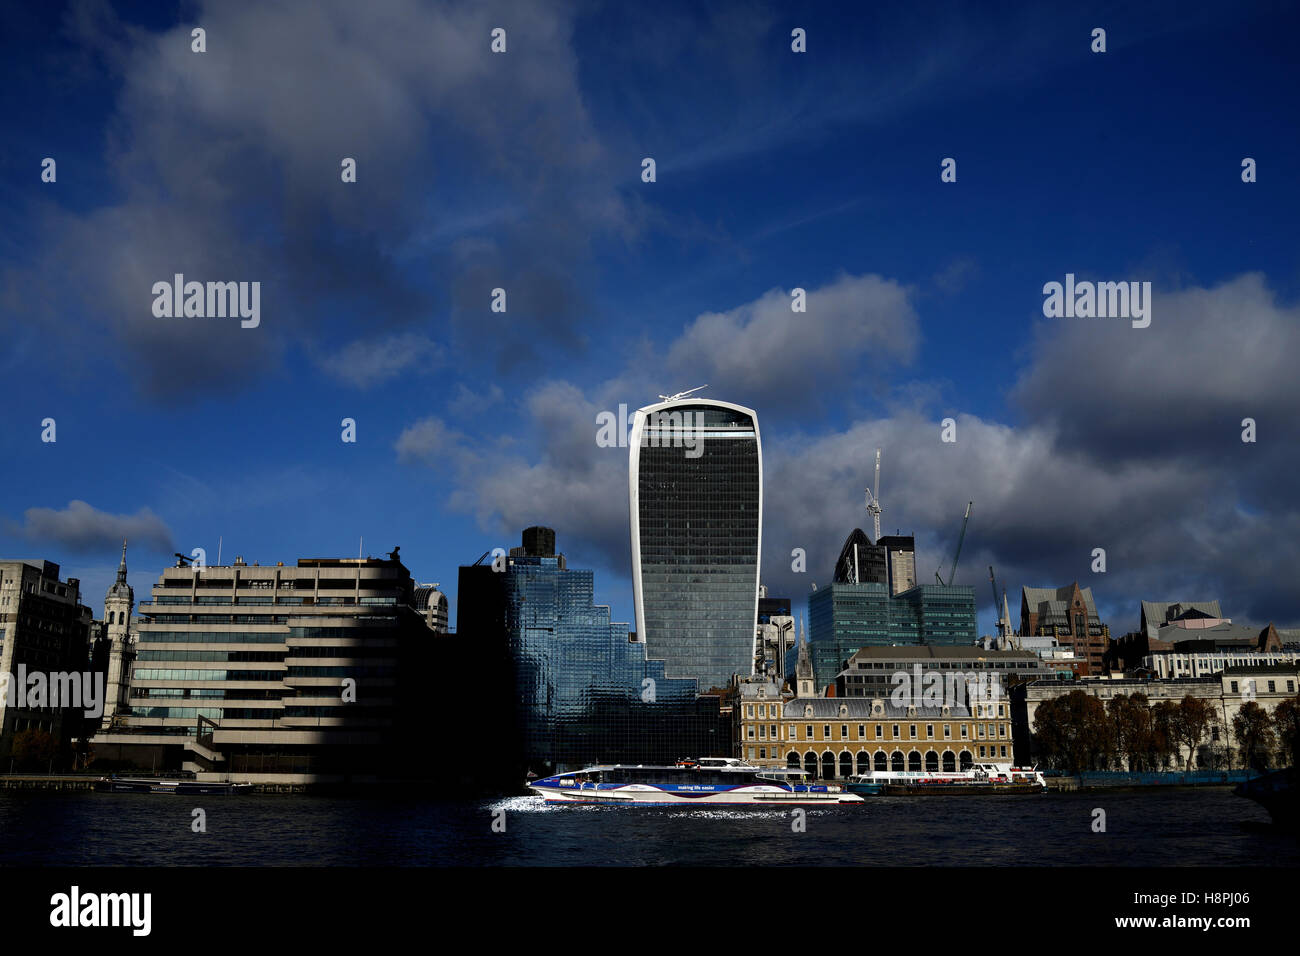 A Thames Clipper riverboat passes in front of the Walkie Talkie building, London Stock Photo